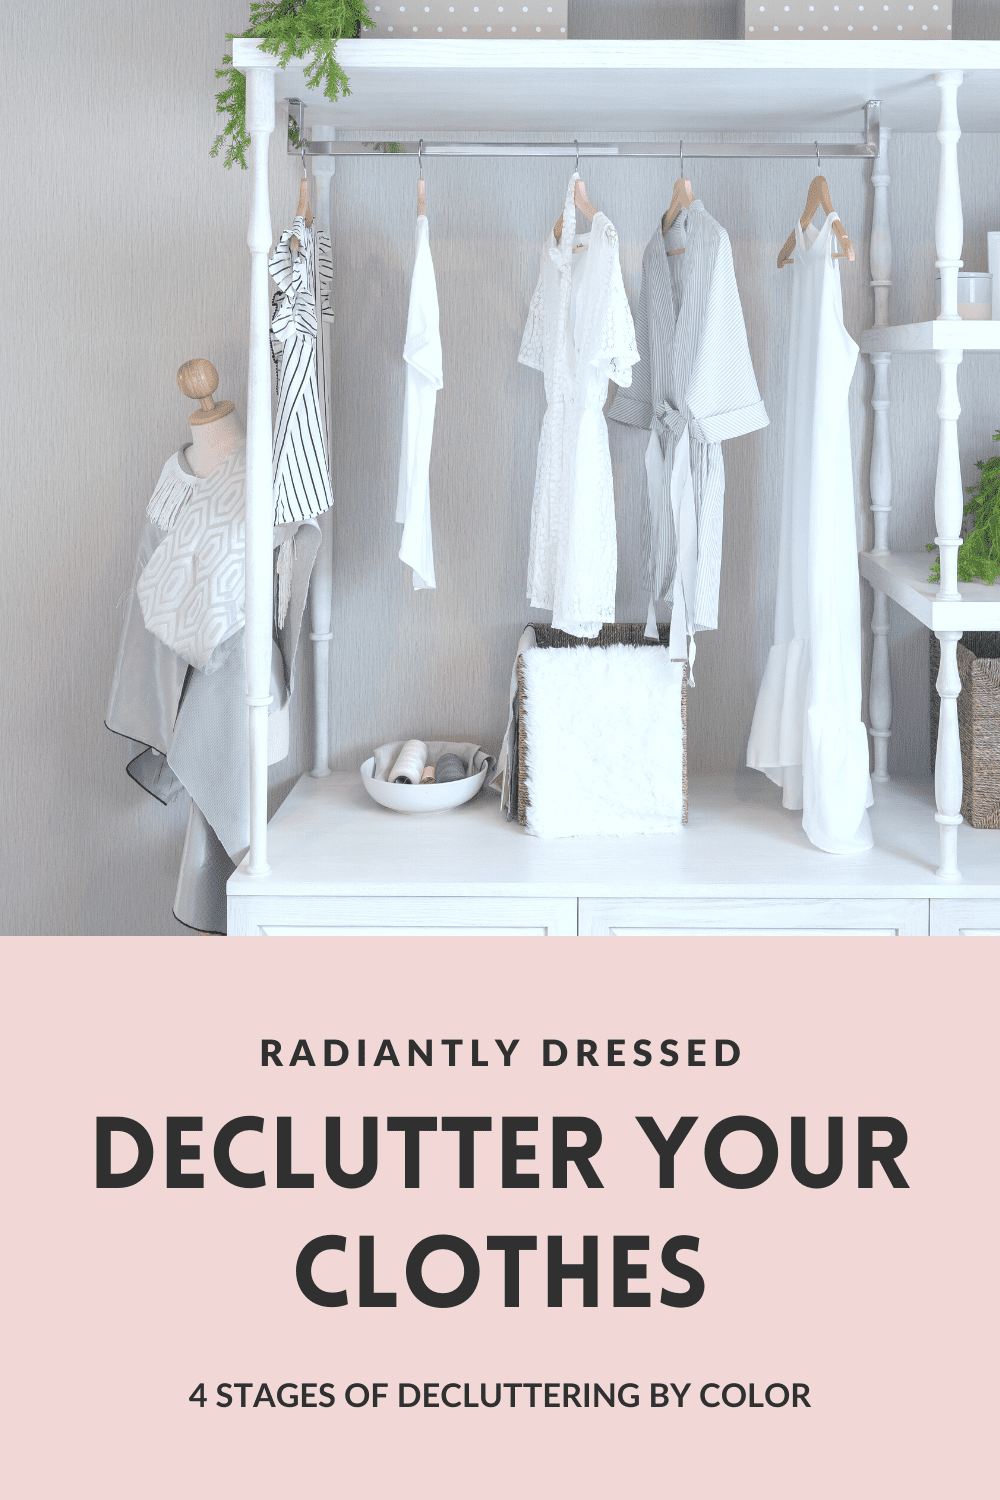 How to Declutter Your Clothes Using Color